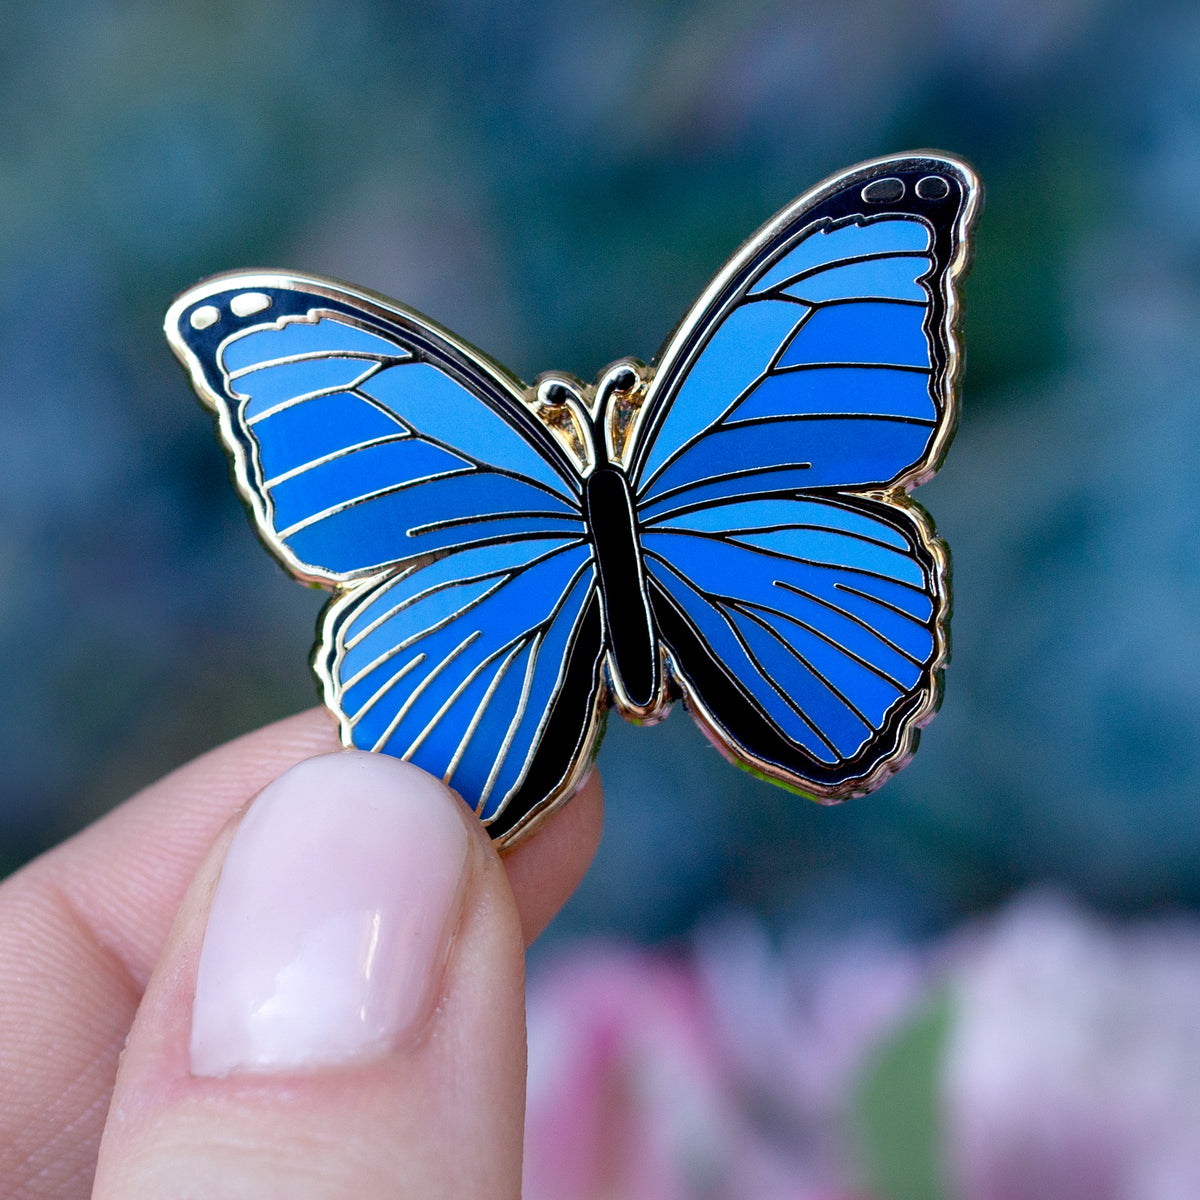 blue morpho butterfly pictures